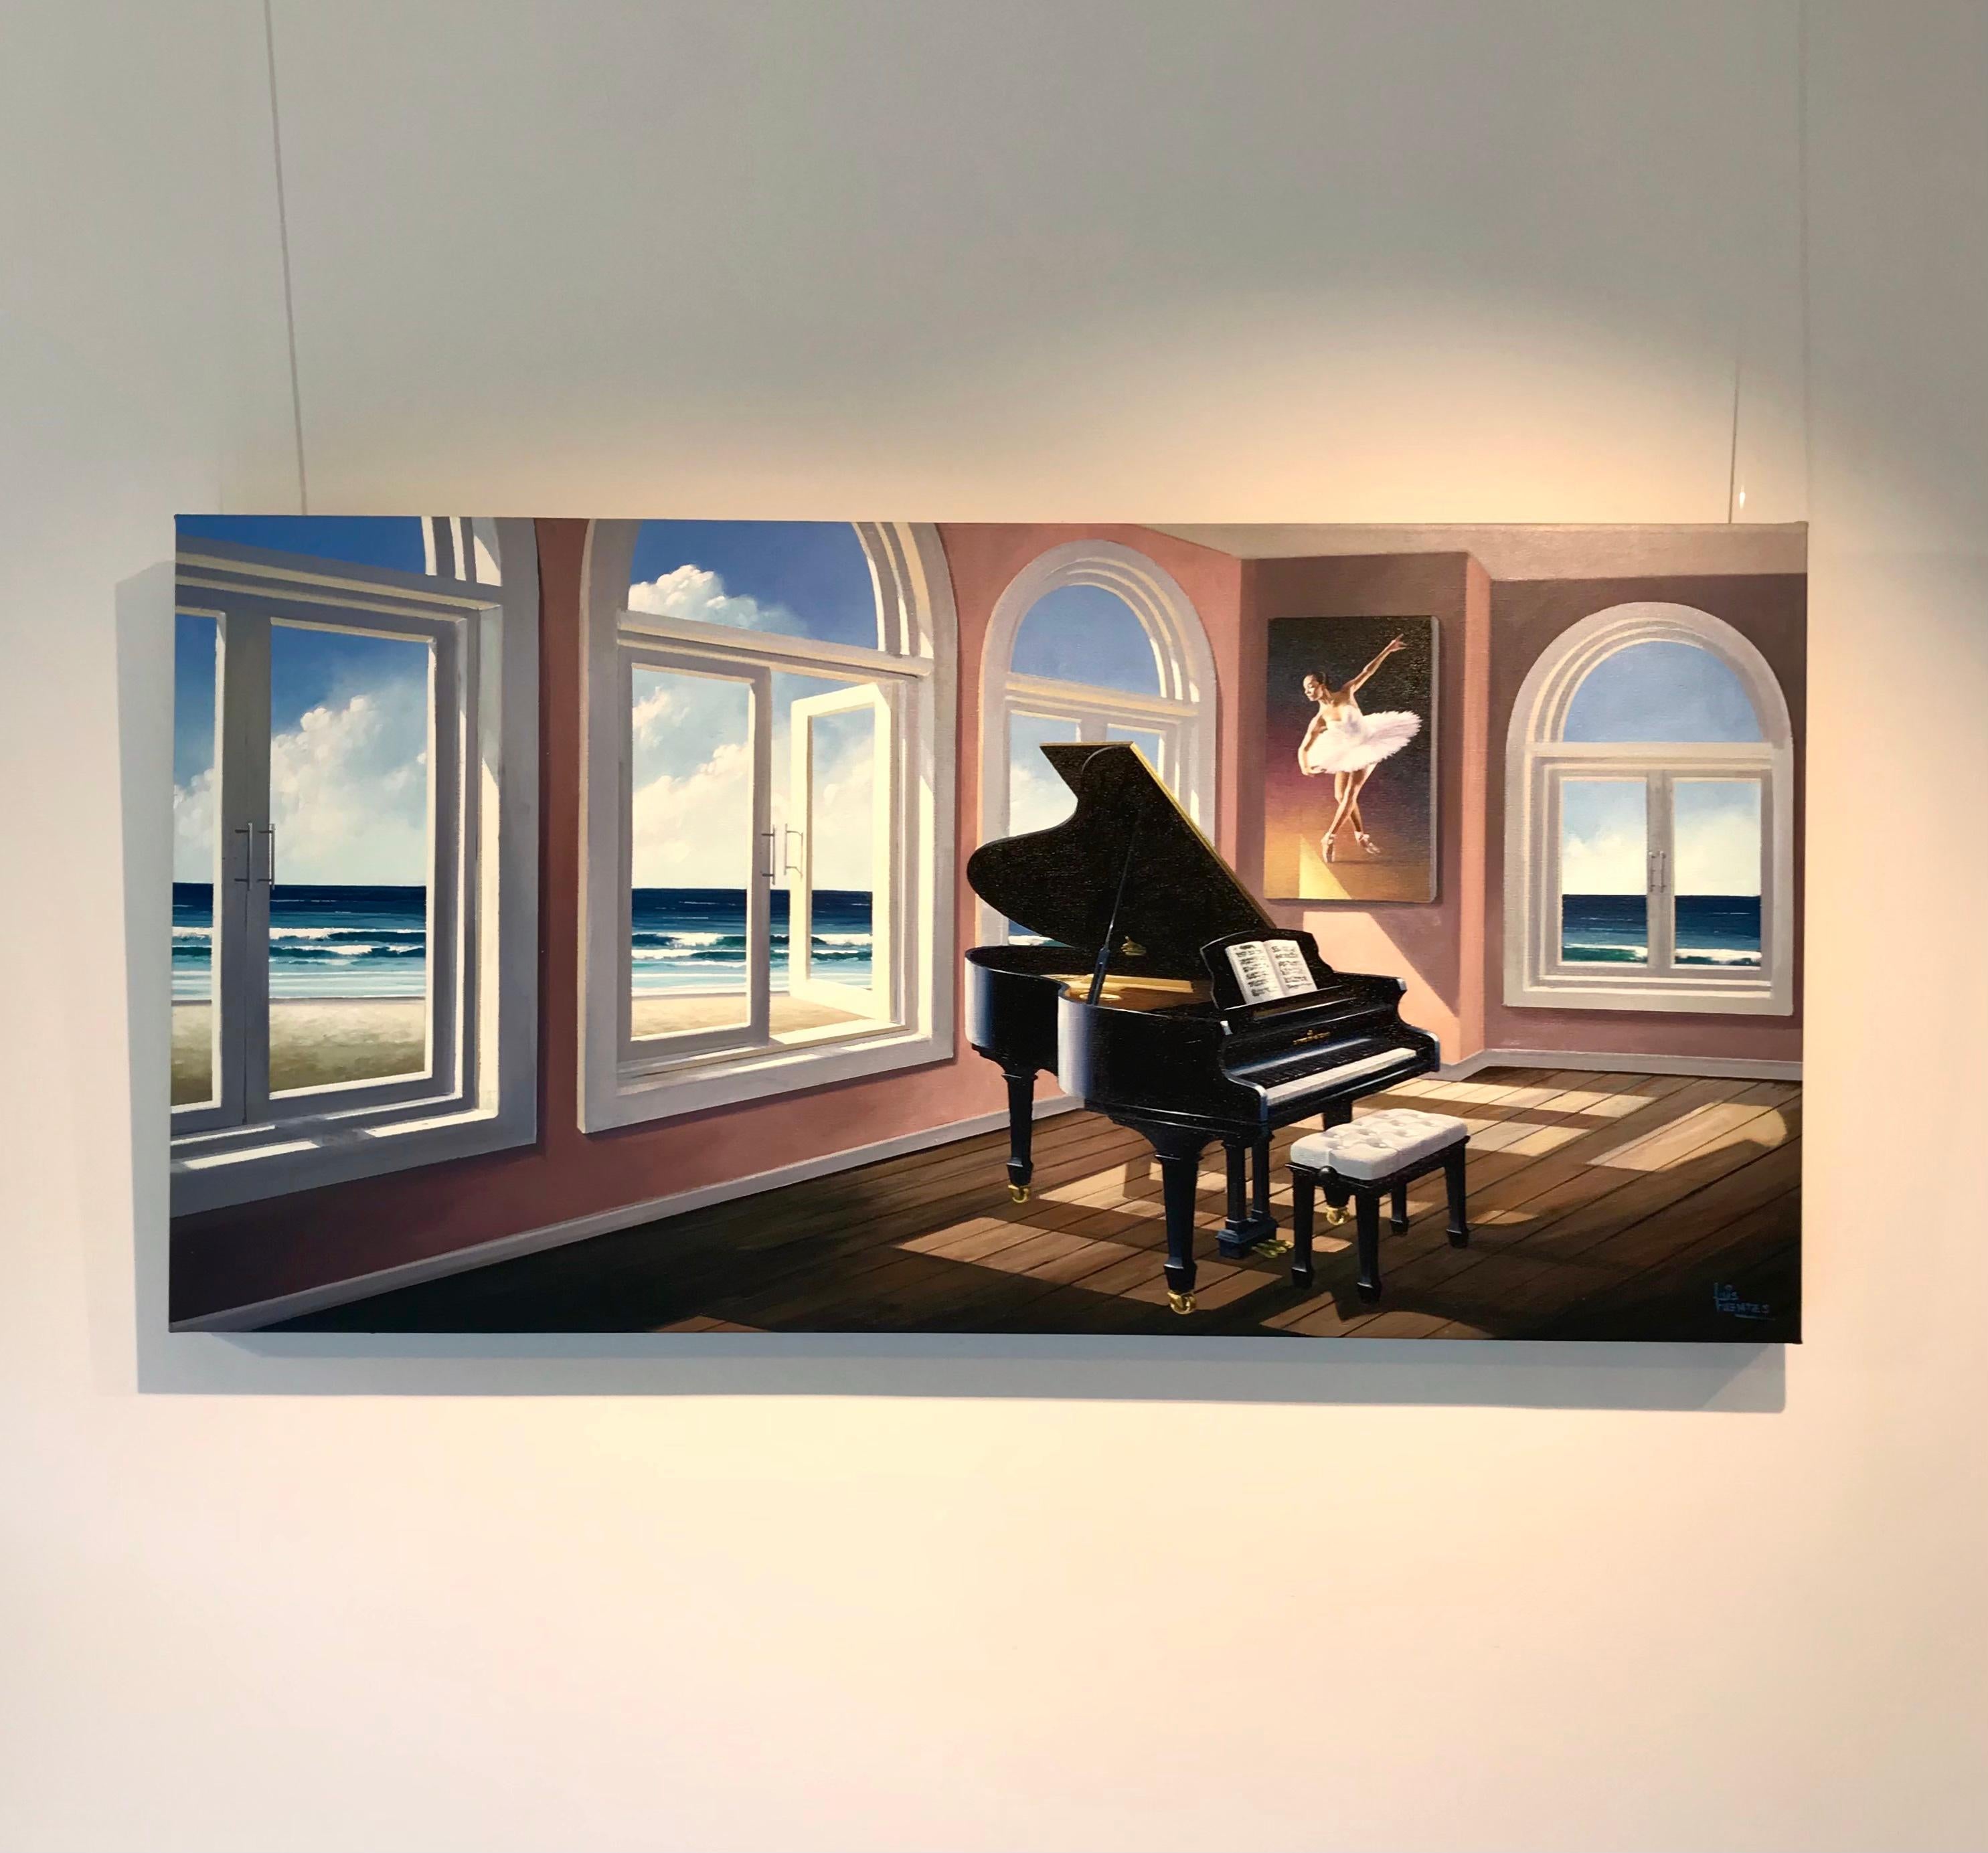 Symphony by the Sea - Surrealist realism modern interior artwork oil painting - Painting by Luis Fuentes